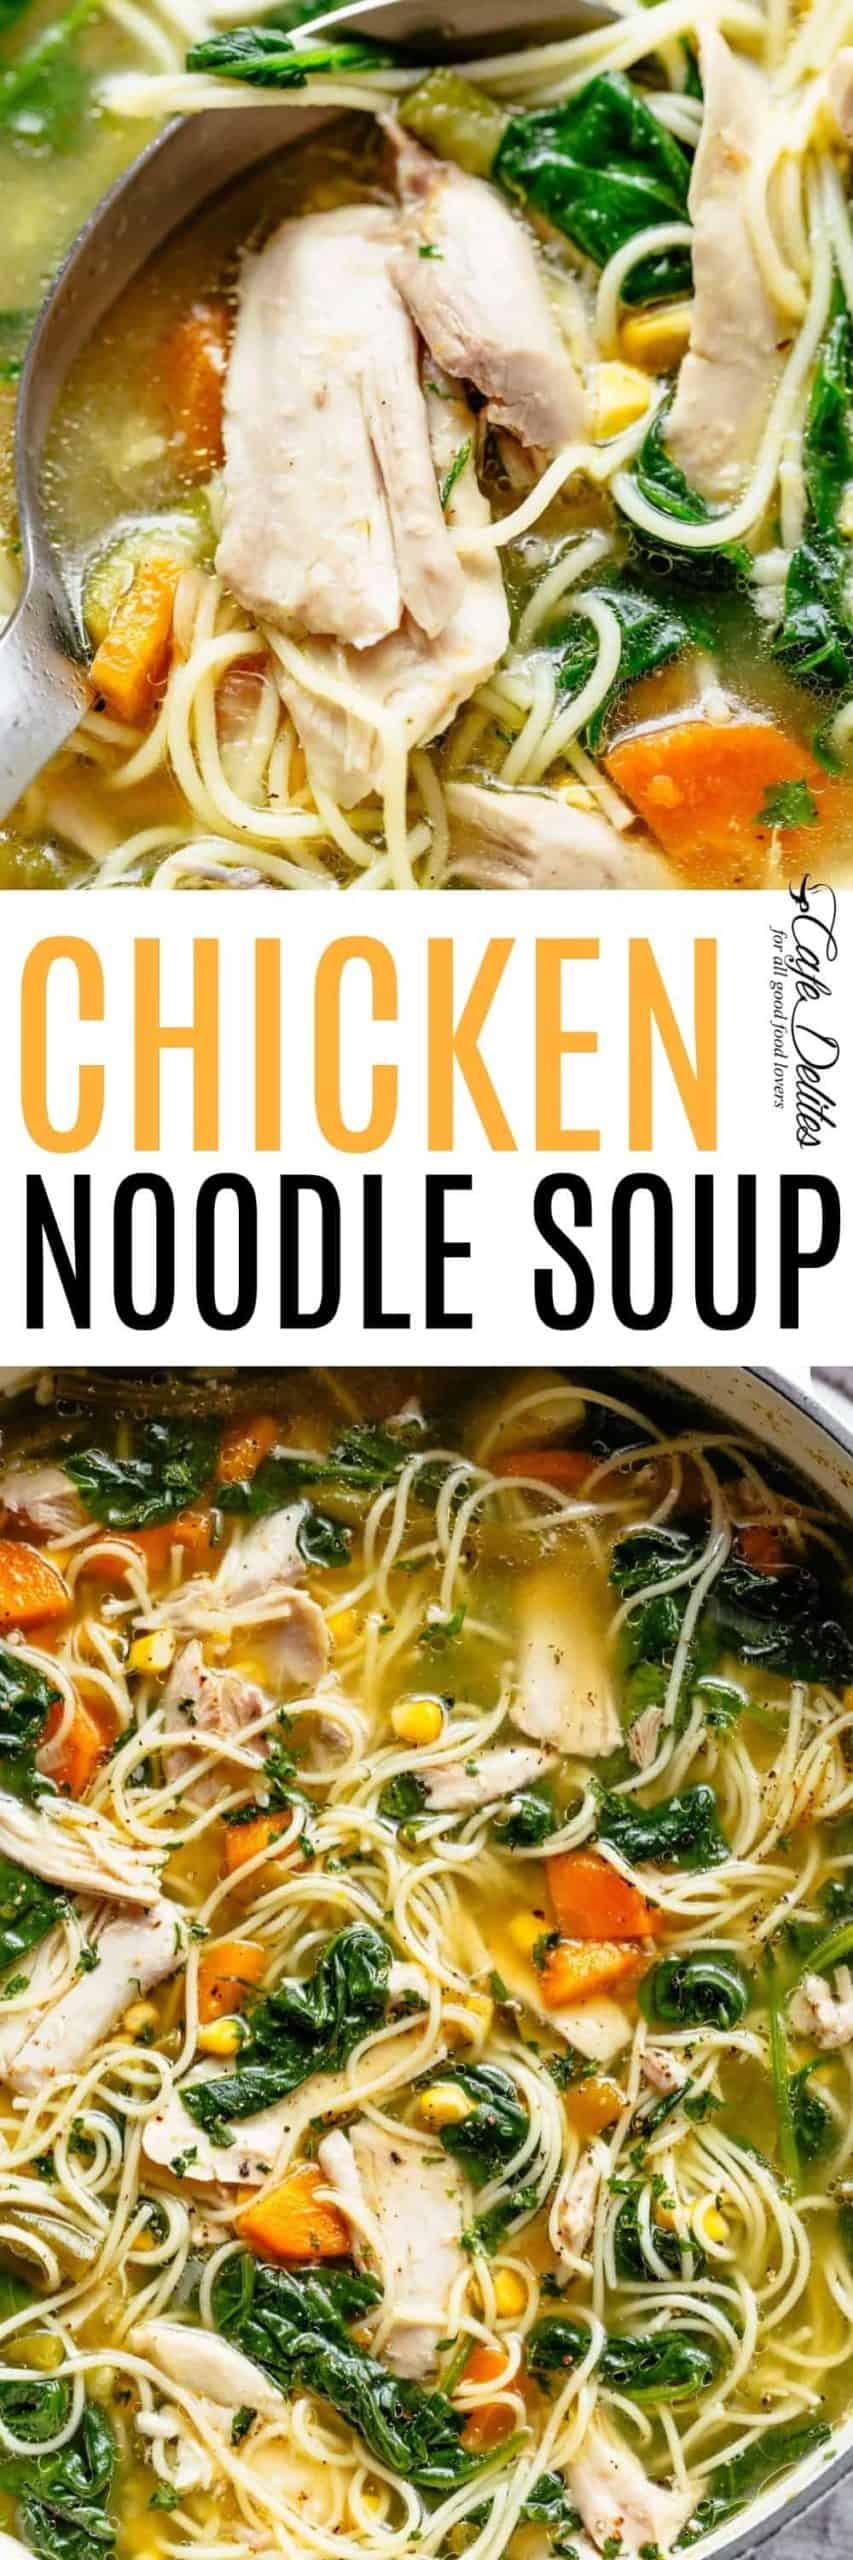 Homemade Chicken Noodle Soup loaded with vegetables with a delicious broth made from scratch! One pot...one soup! Perfect for any day of the week with the broth AND the soup made from scratch in under 45 minutes. You will love this! | cafedelites.com